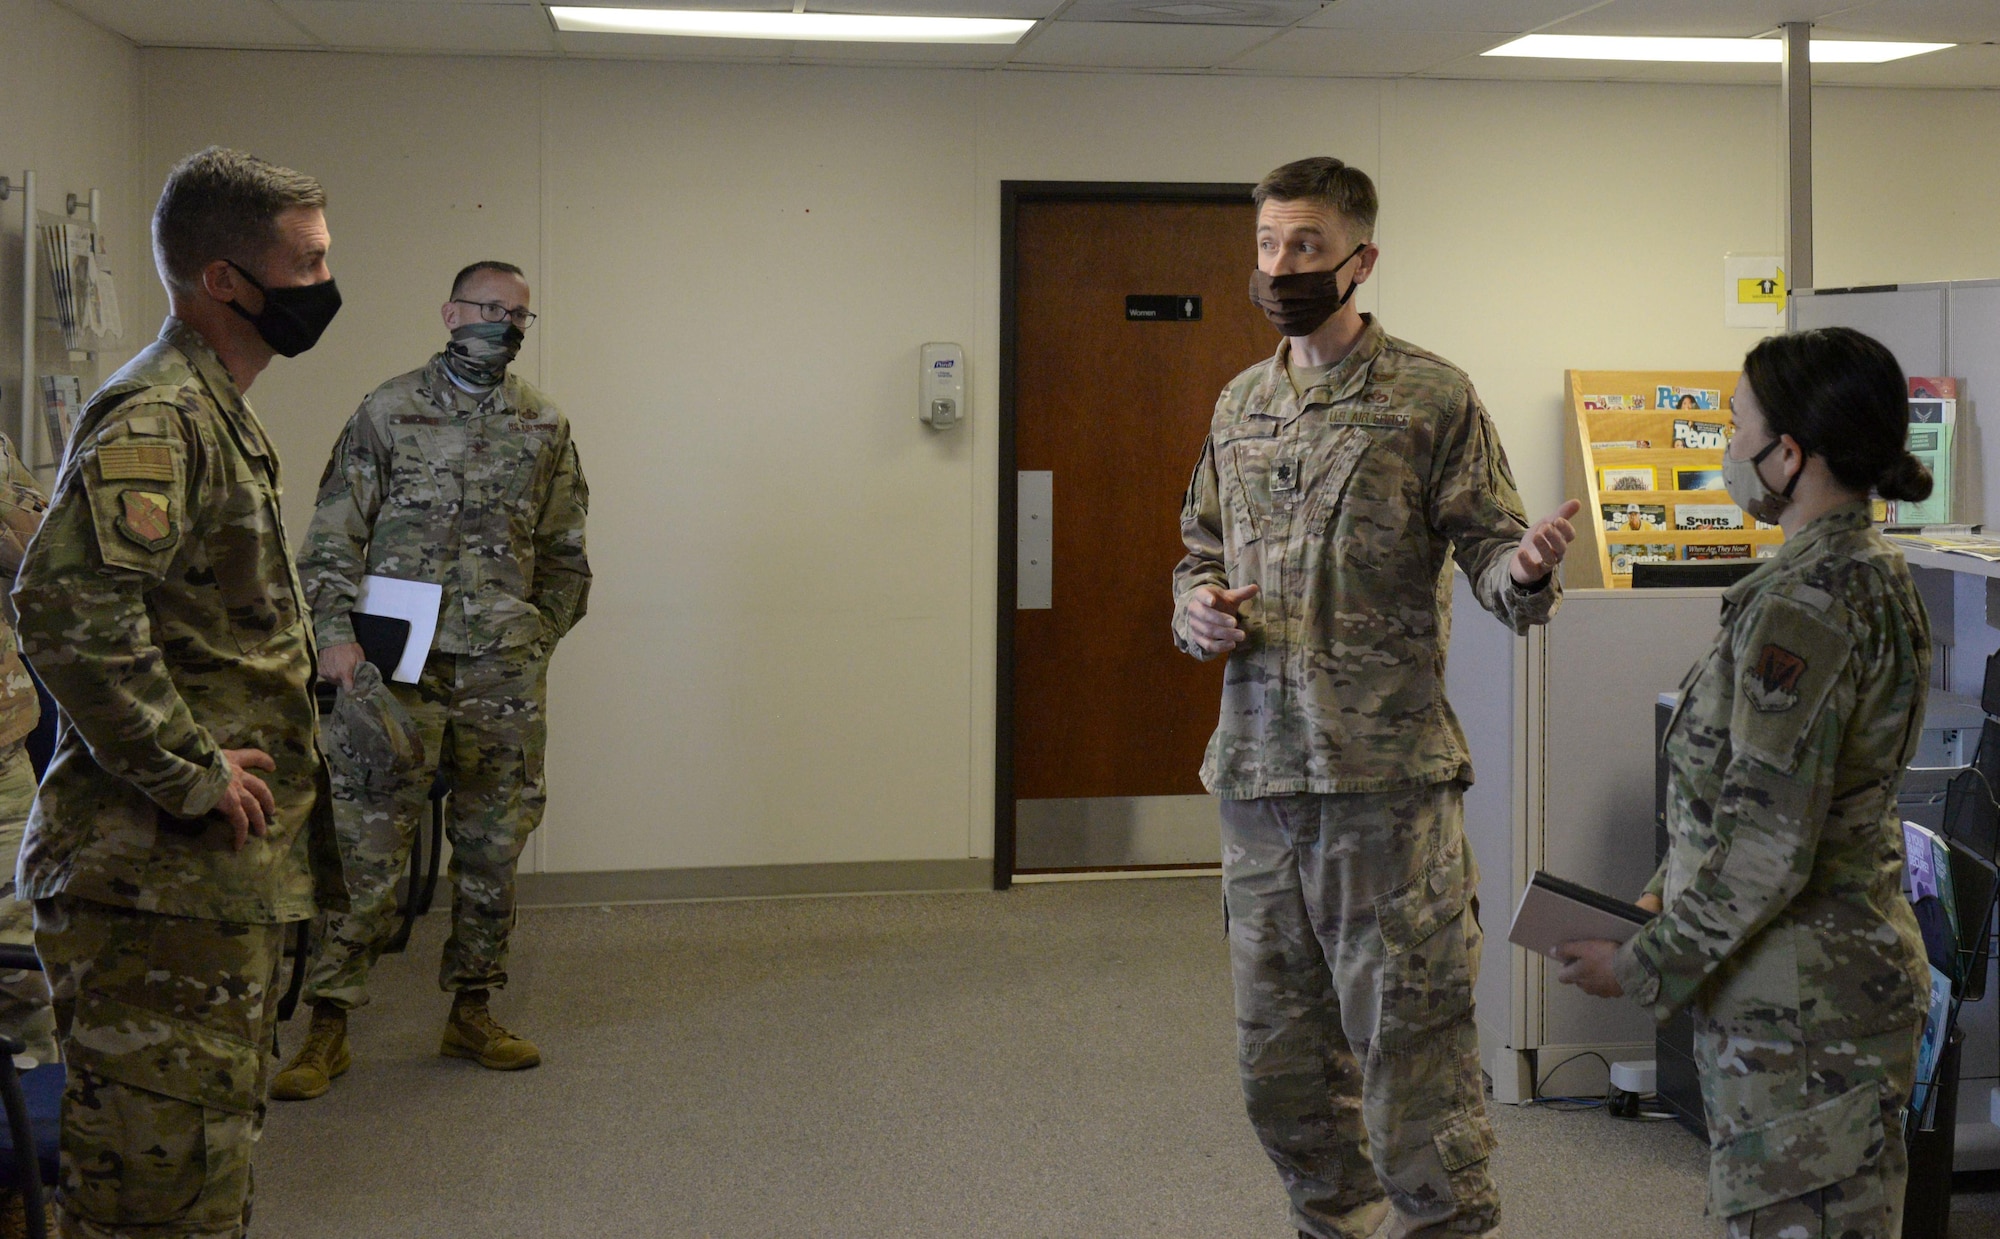 Airmen brief 99th Air Base Wing leadership in the personnel flight trailer's front room.